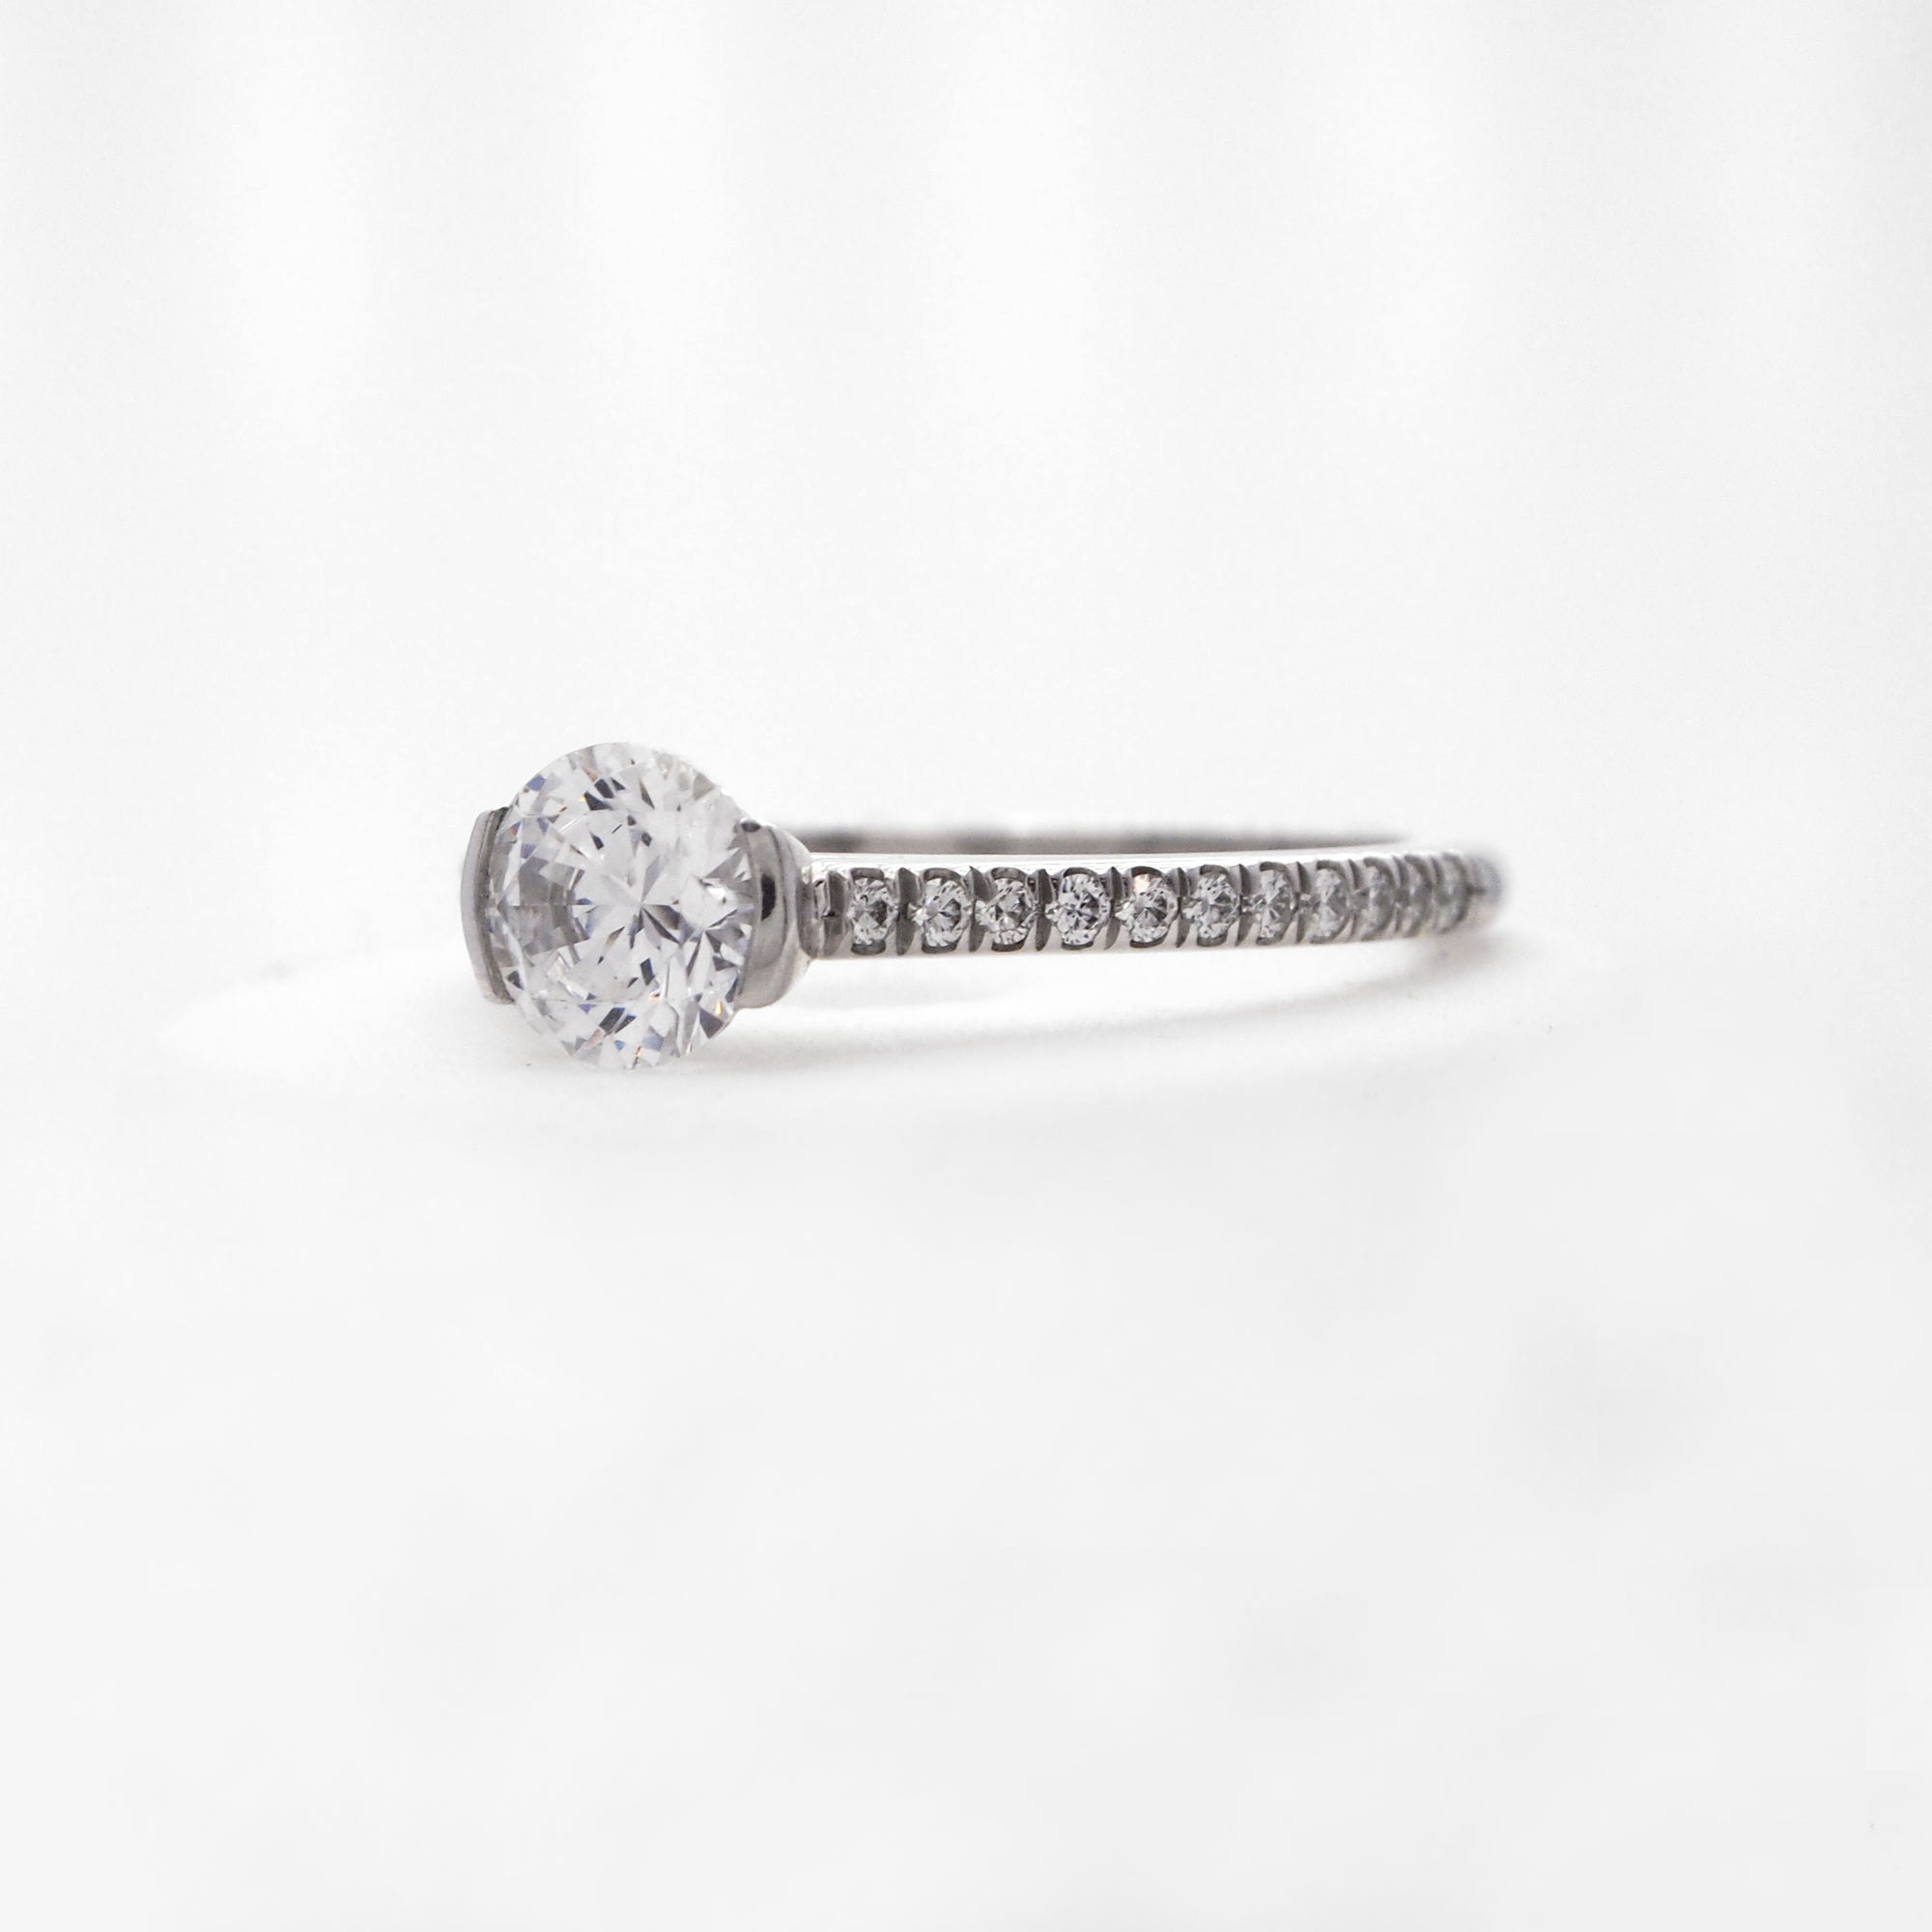 Platinum diamond engagement ring featuring a half bezel center stone setting, and round brilliant diamonds weighing a total of 0.16 carats. 